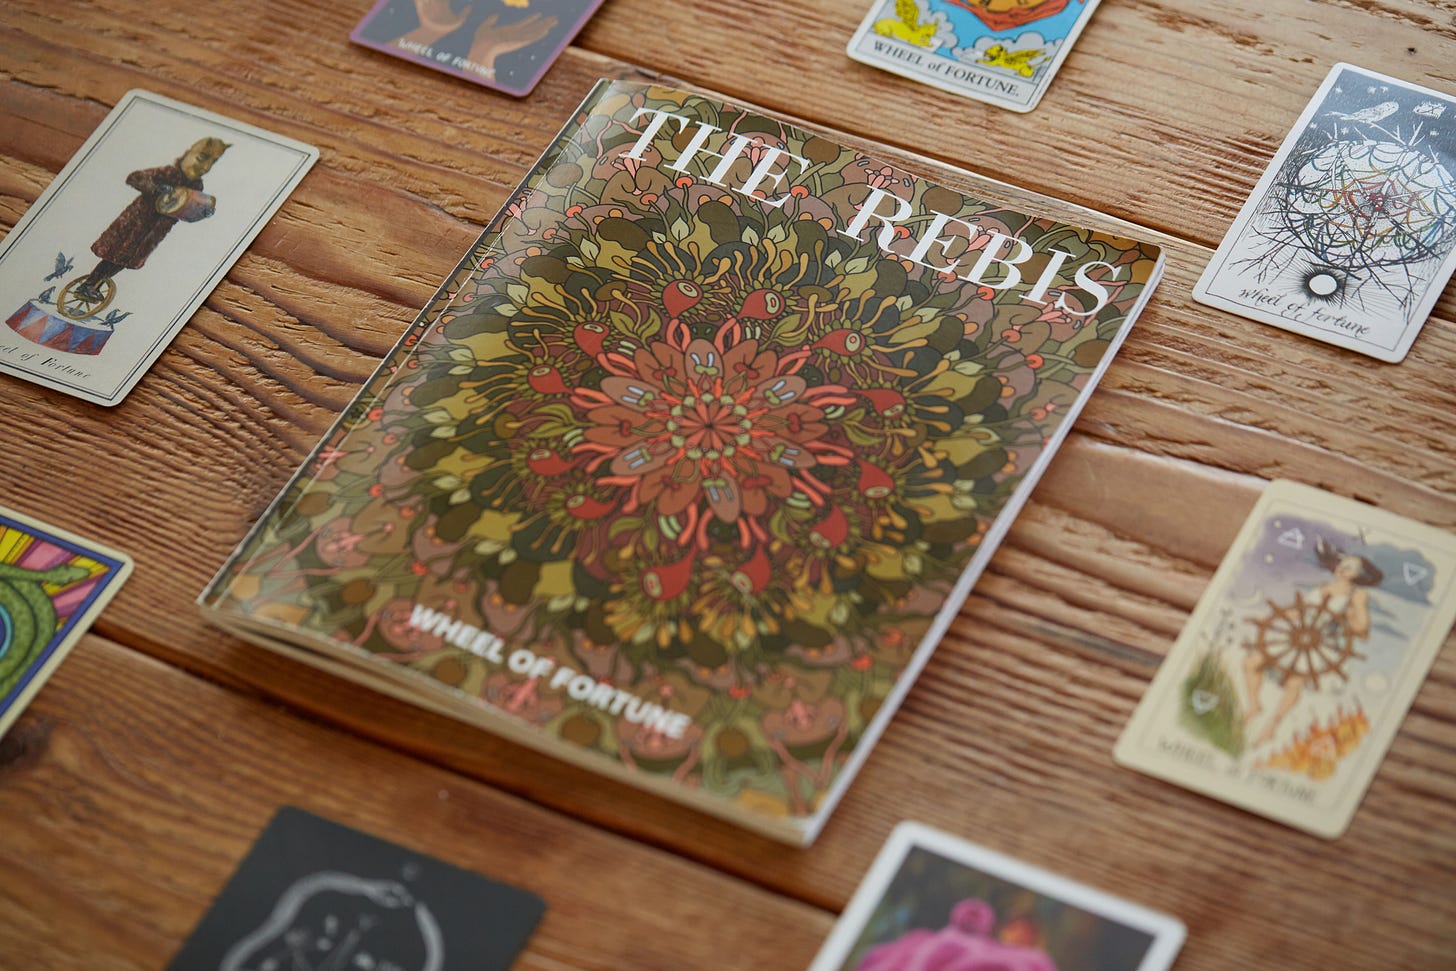 The Rebis: Wheel of Fortune, a magazine featuring an earth-toned mandala with greens, reds, and brown elements, sits at the center of a circle of tarot cards from various decks. Every tarot card is a different interpretation of the Wheel of Fortune.